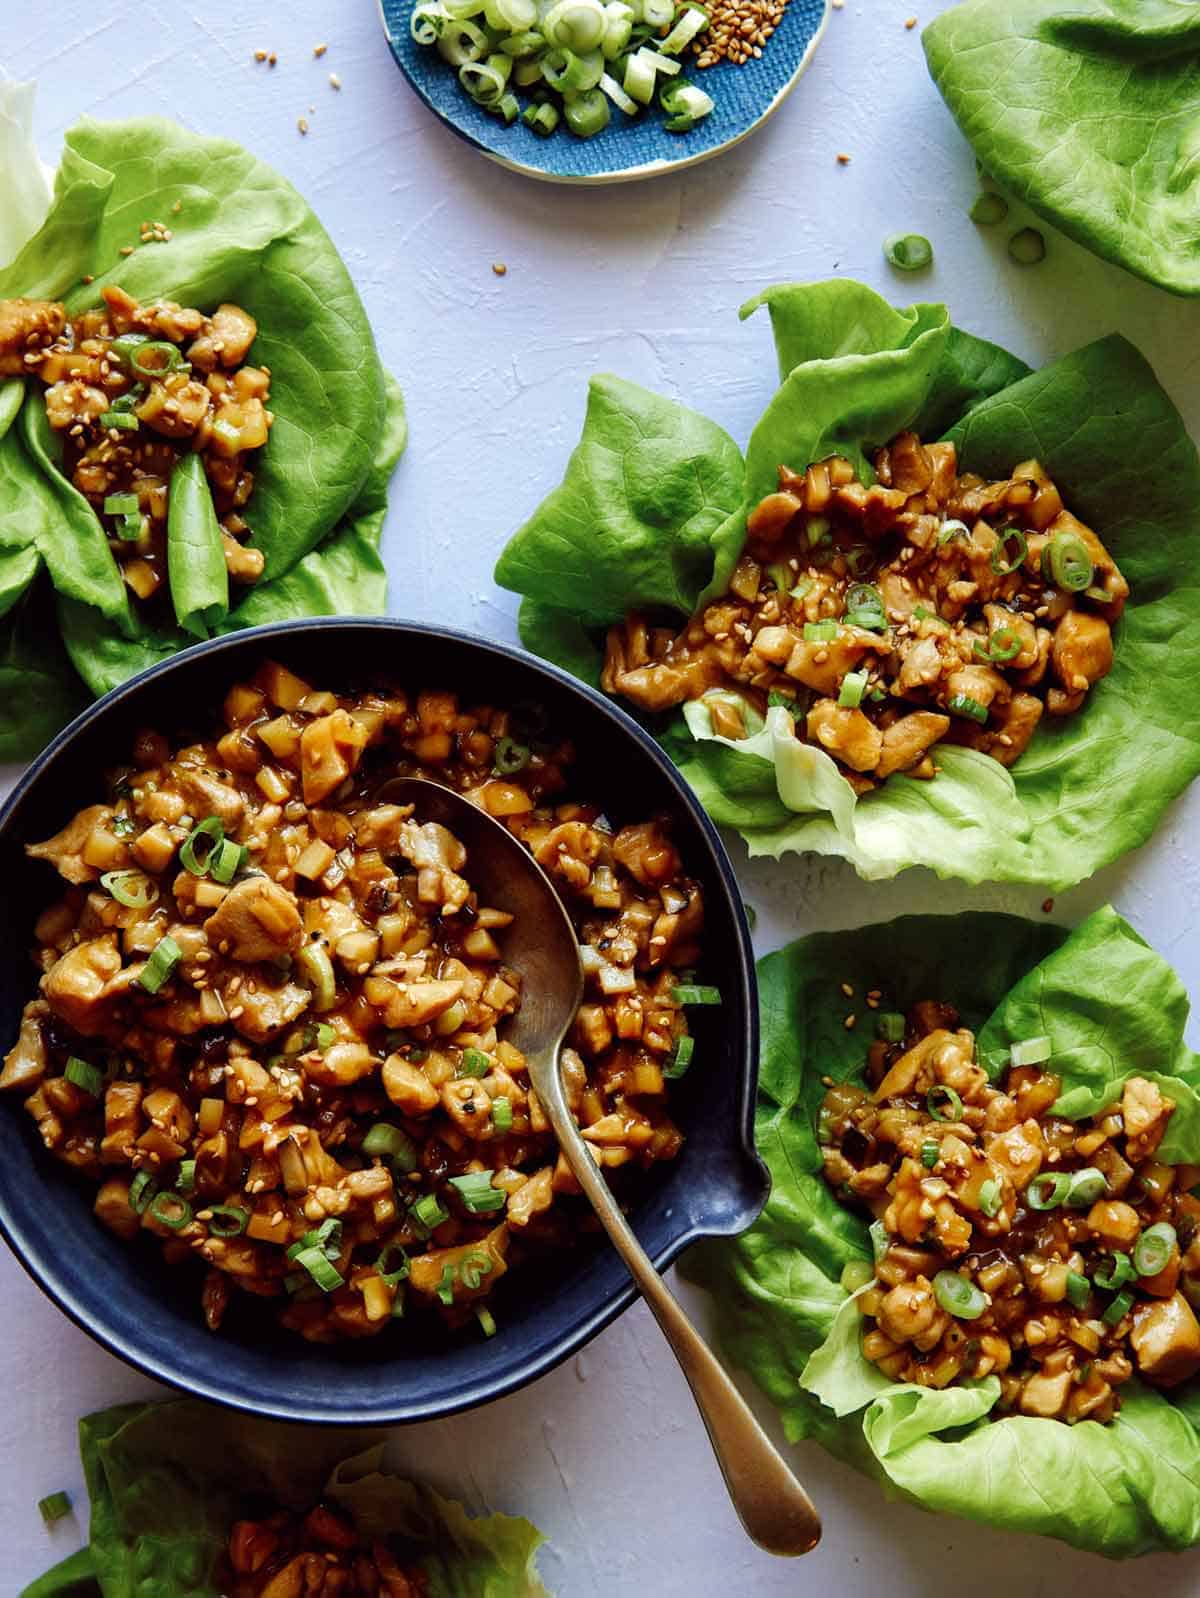 Chicken lettuce wraps with lettuce cups full of the chicken mixture.